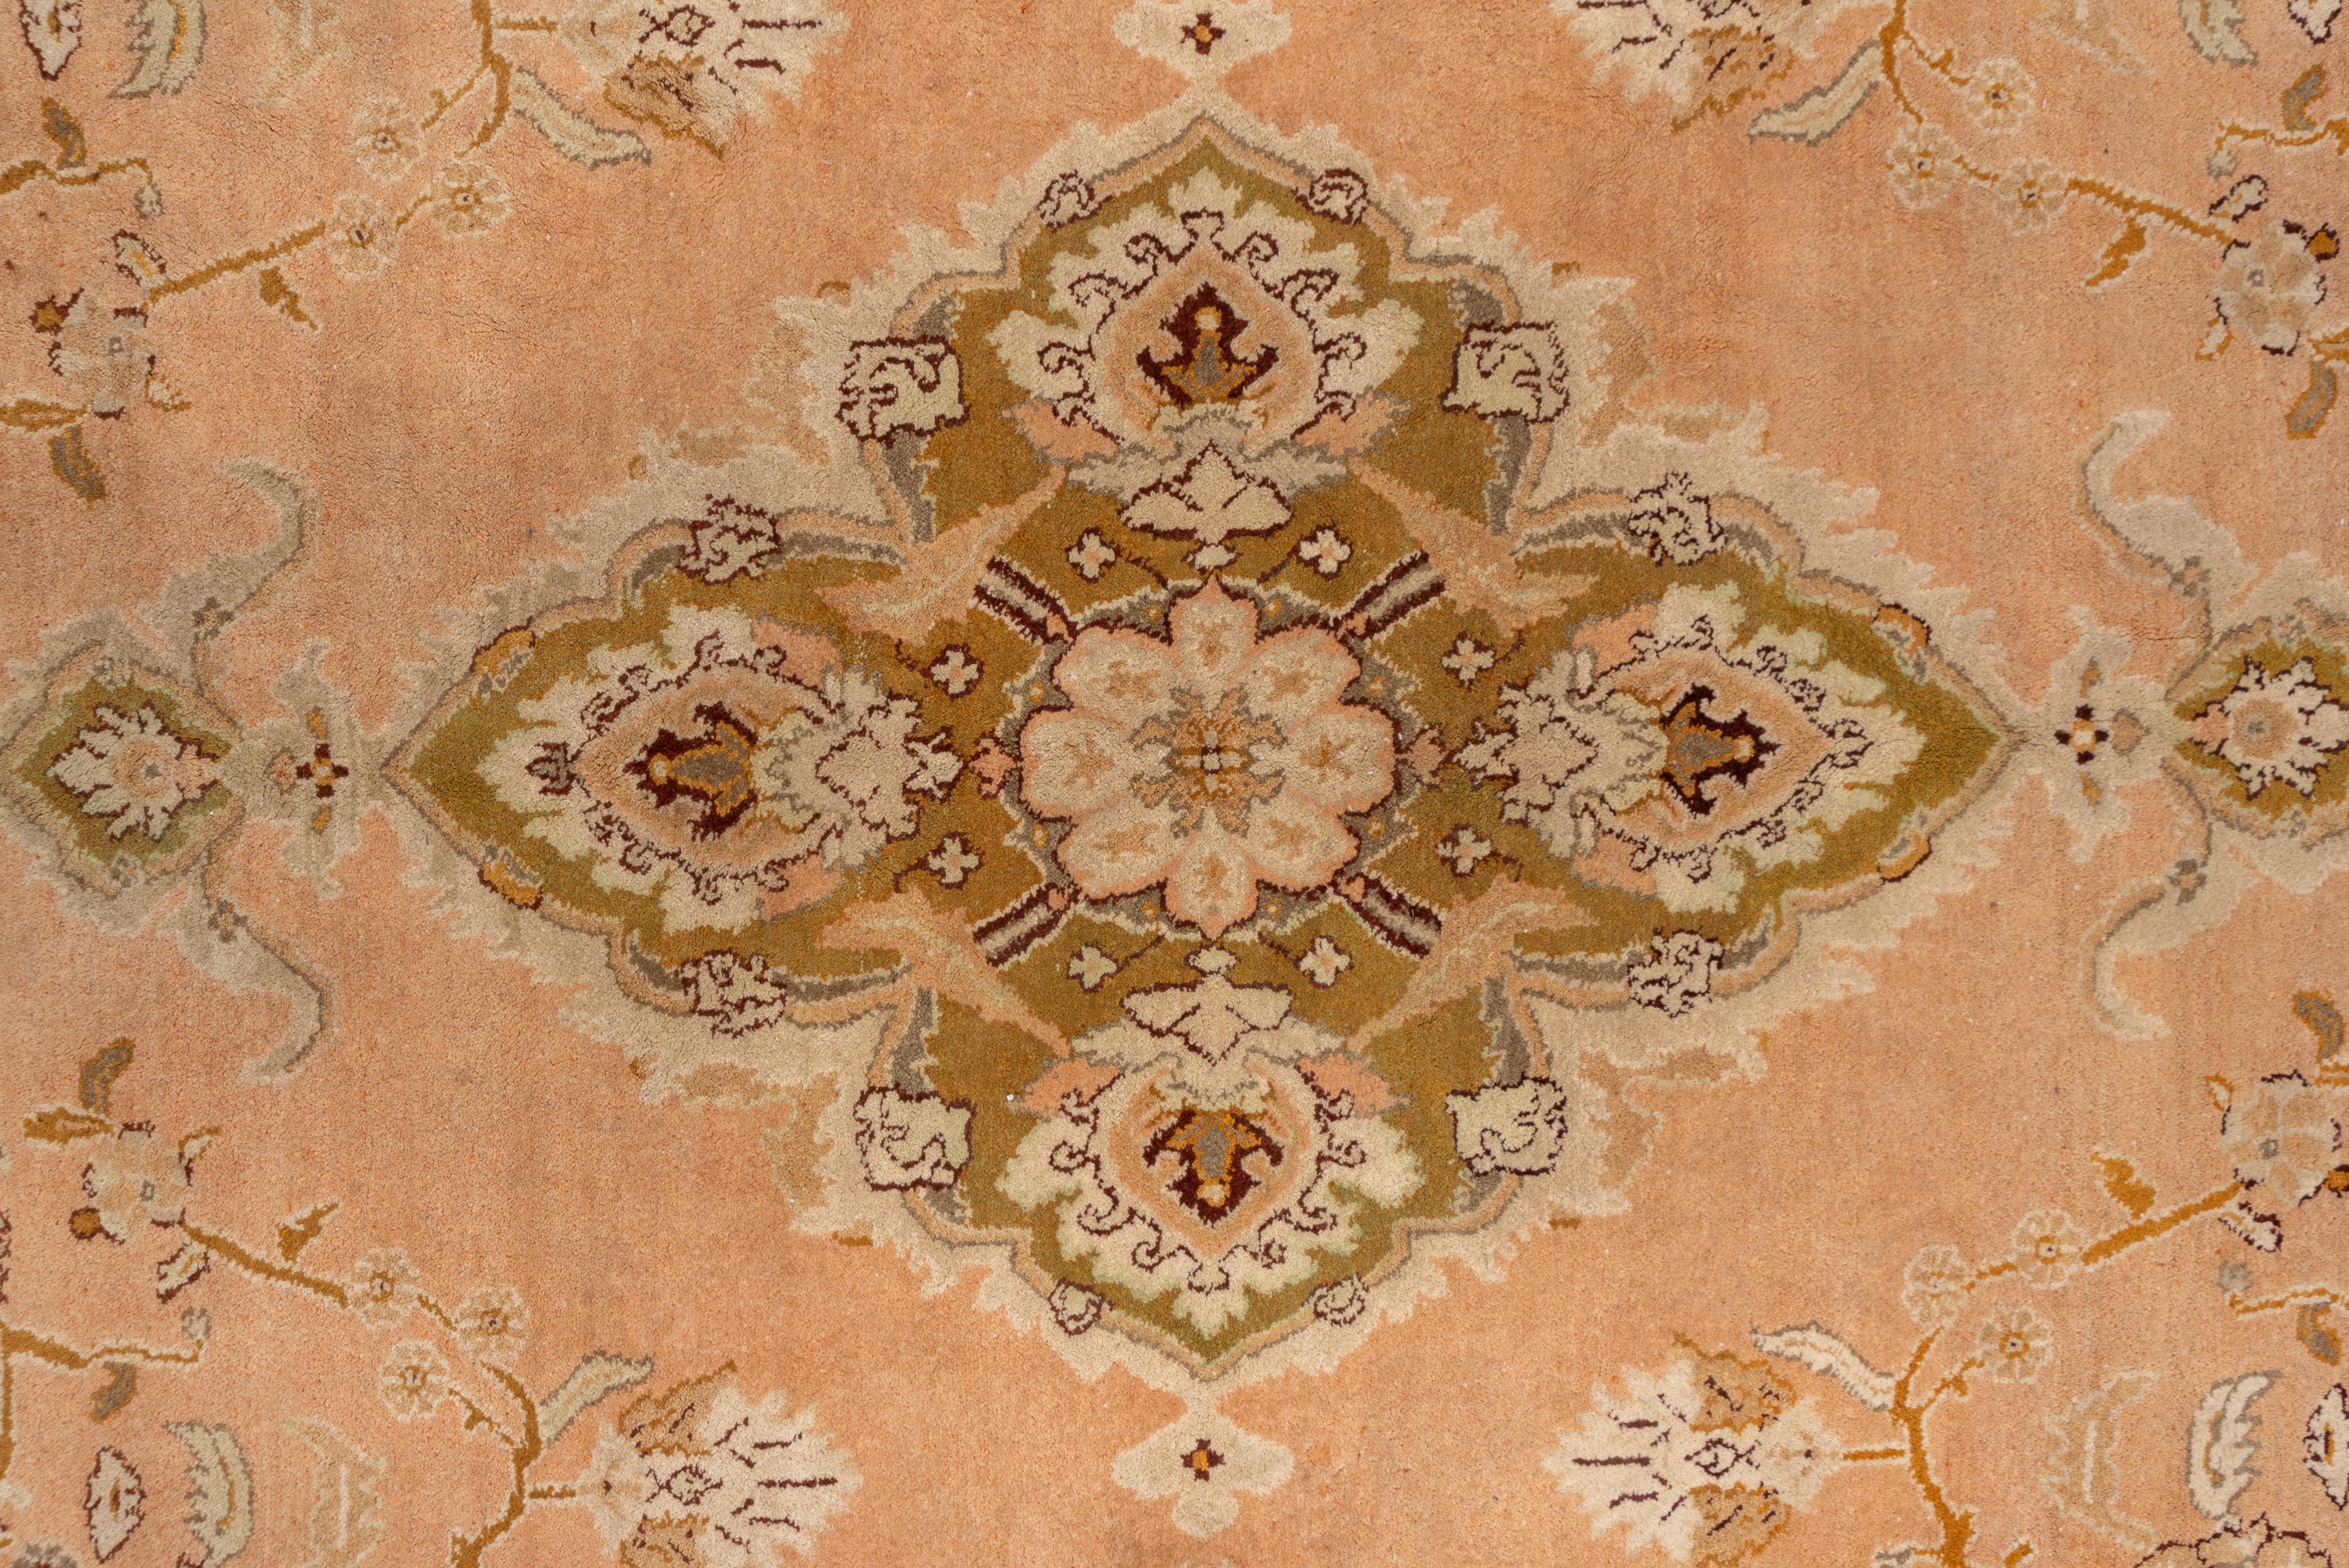 No overall field color, but areas of light blue, salmon, rust, buff and pale green all display palmettes, rosettes and stiff vine segments. The equally variegated border features lancet leaves and reversing palmettes. A northern Indian city rug in